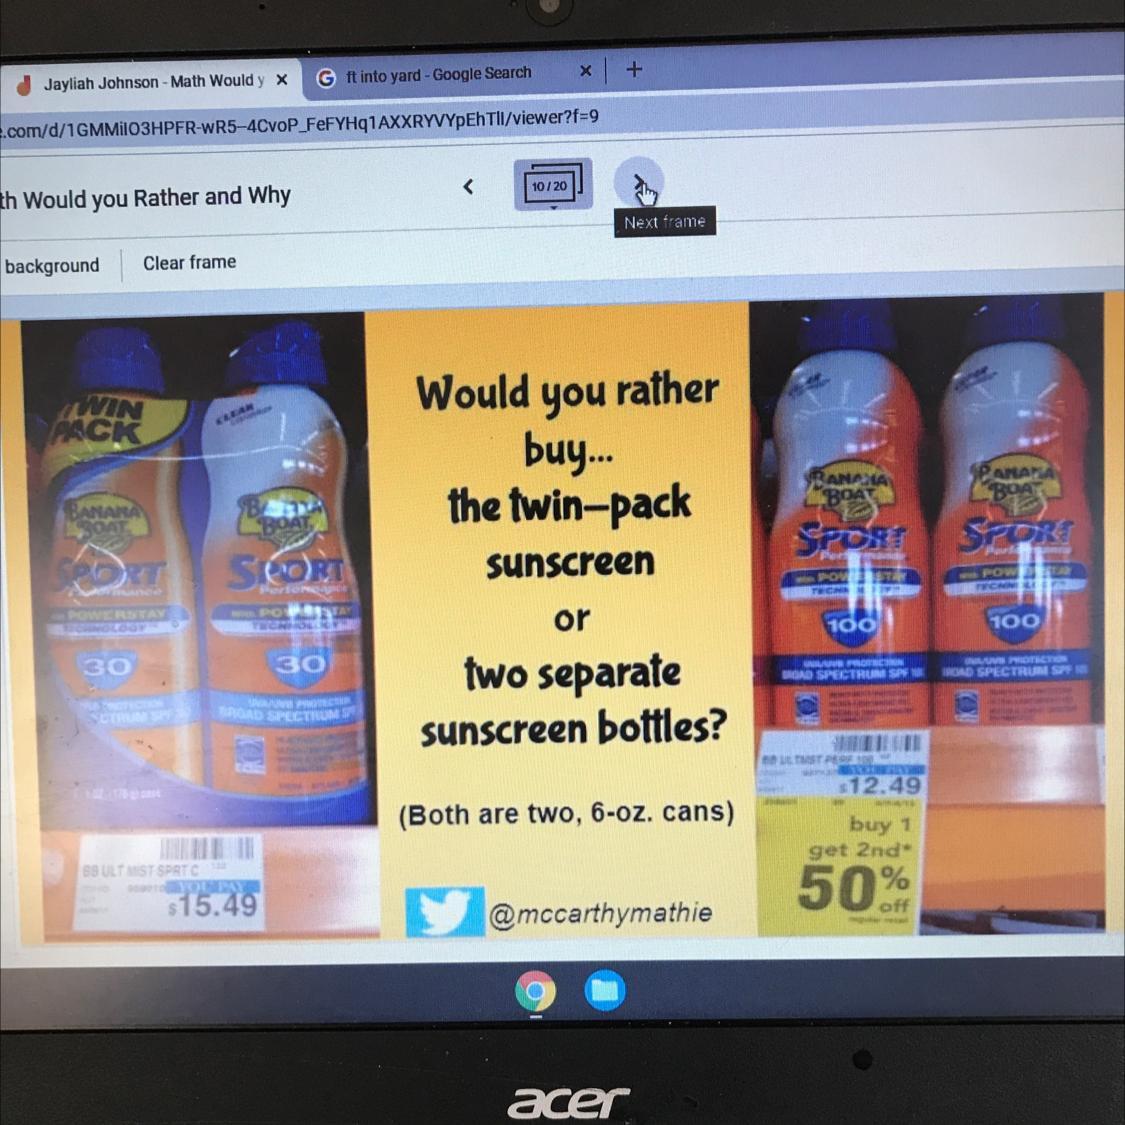 Would You Ratherbuy...the Twin-packsunscreenortwo Separatesunscreen Bottles?1001003030SIRISULTISTRERE$12.49(Both